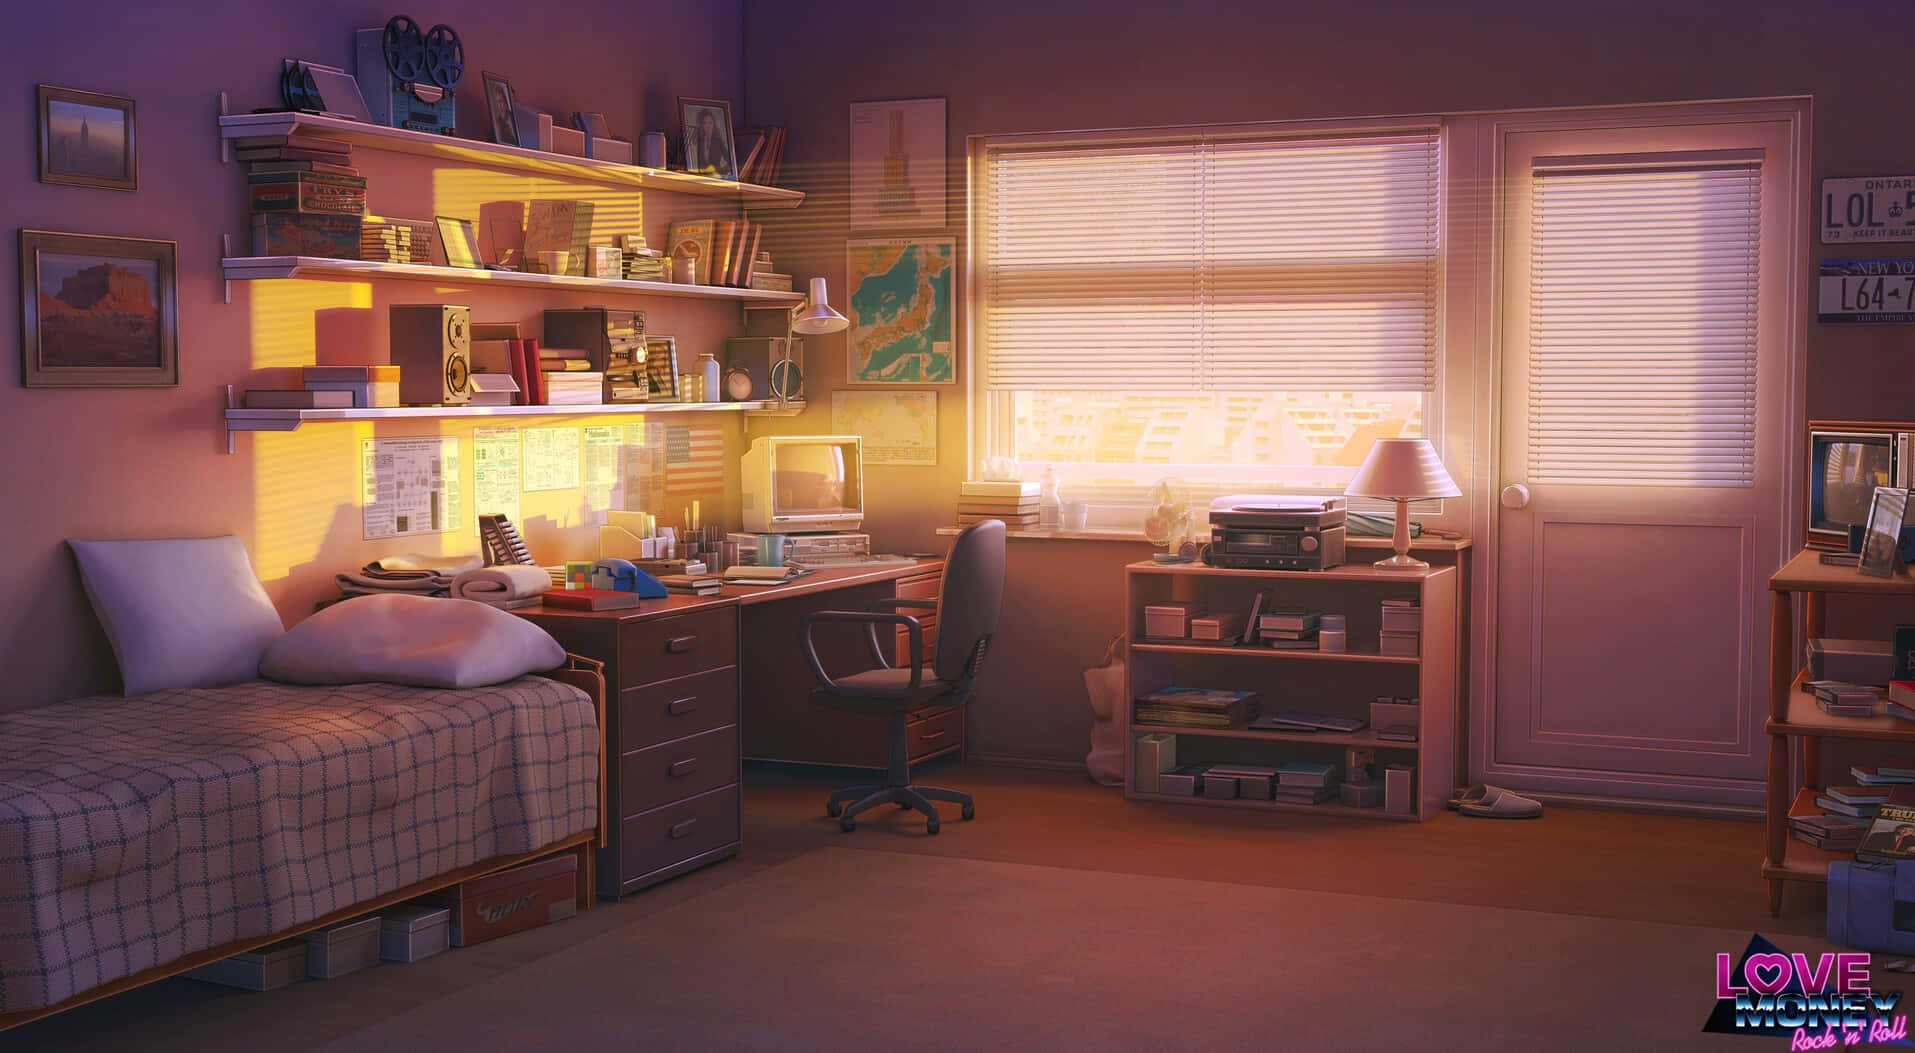 Updated]70+Anime Bedroom Ideas in 2022 (Galleries & Photos) -